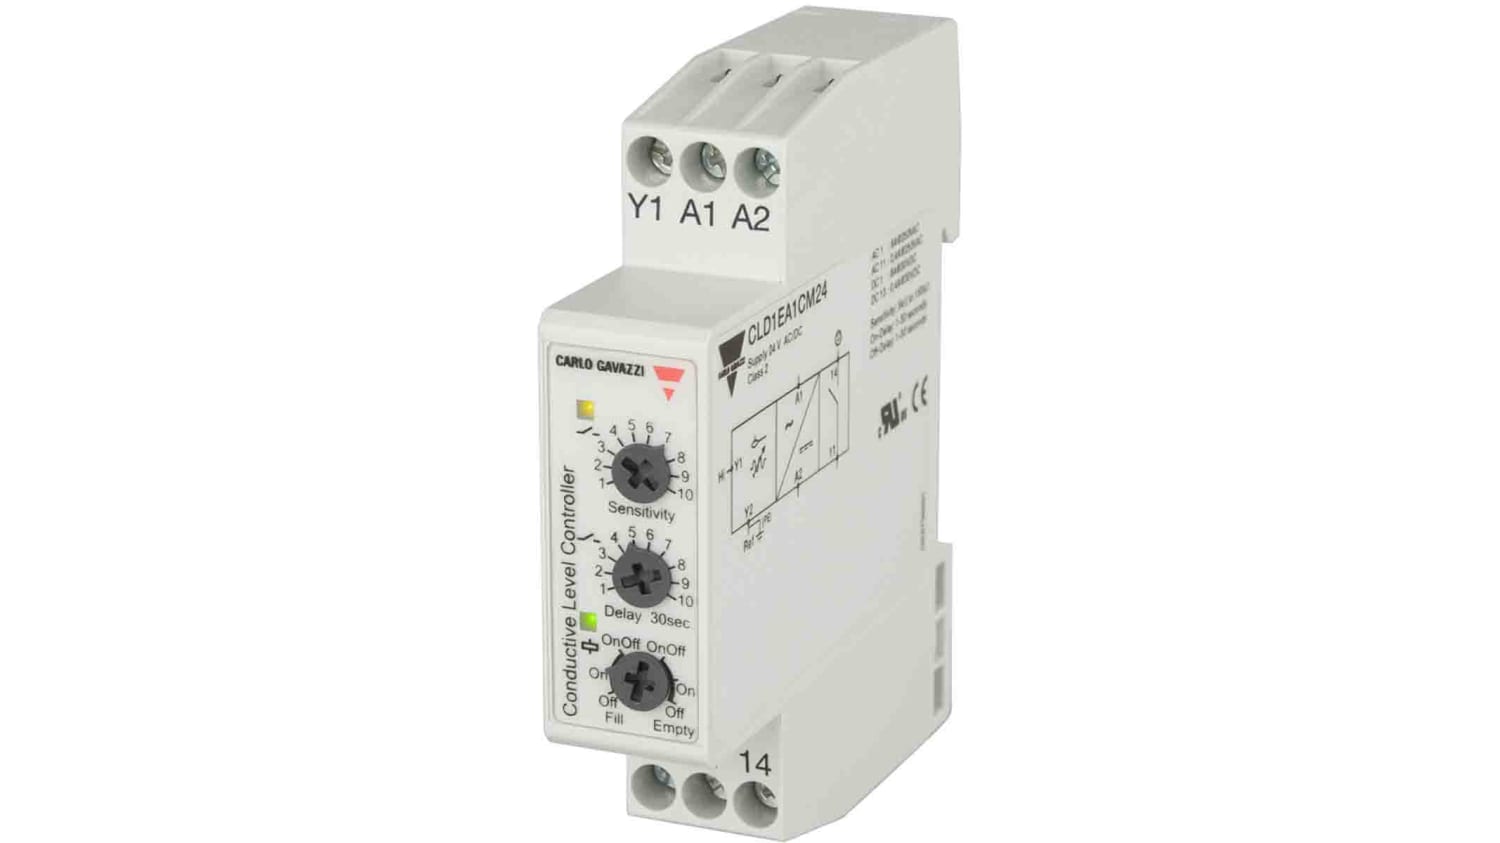 Carlo Gavazzi Cld1ea1cm24 Series Level Controller Din Rail 24 V 1 Analog Input Relay Rs Components